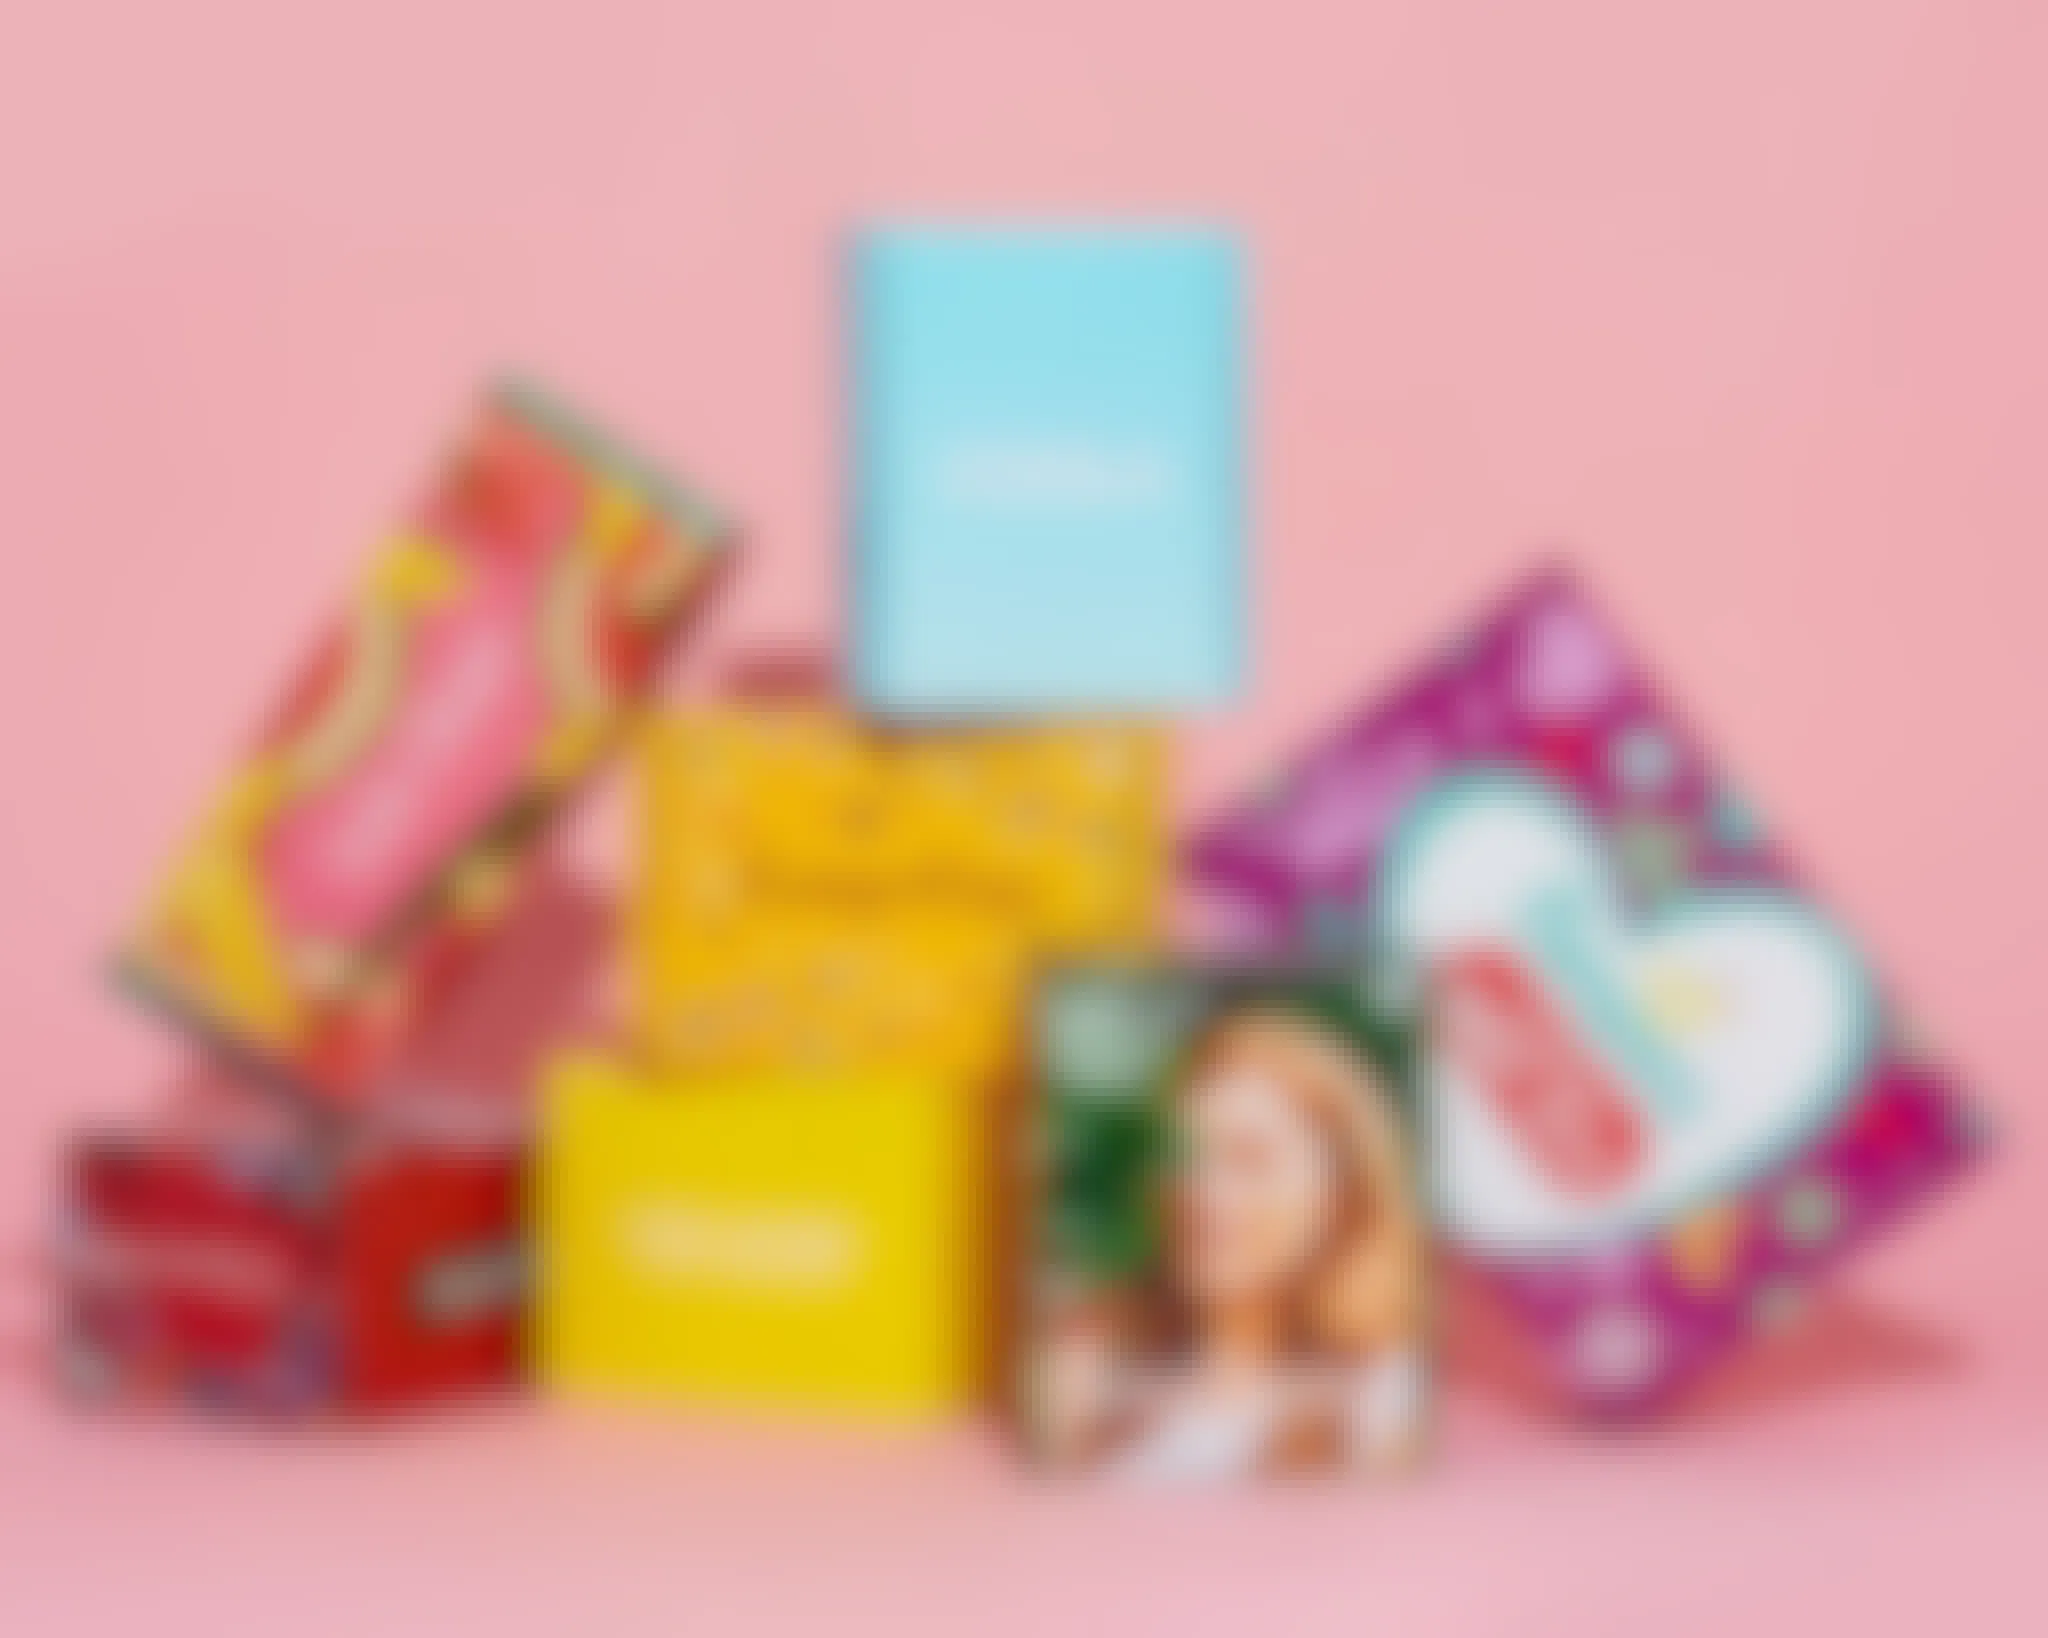 7 free sample boxes from Inflenster stacked on top of each other, on a pink background.